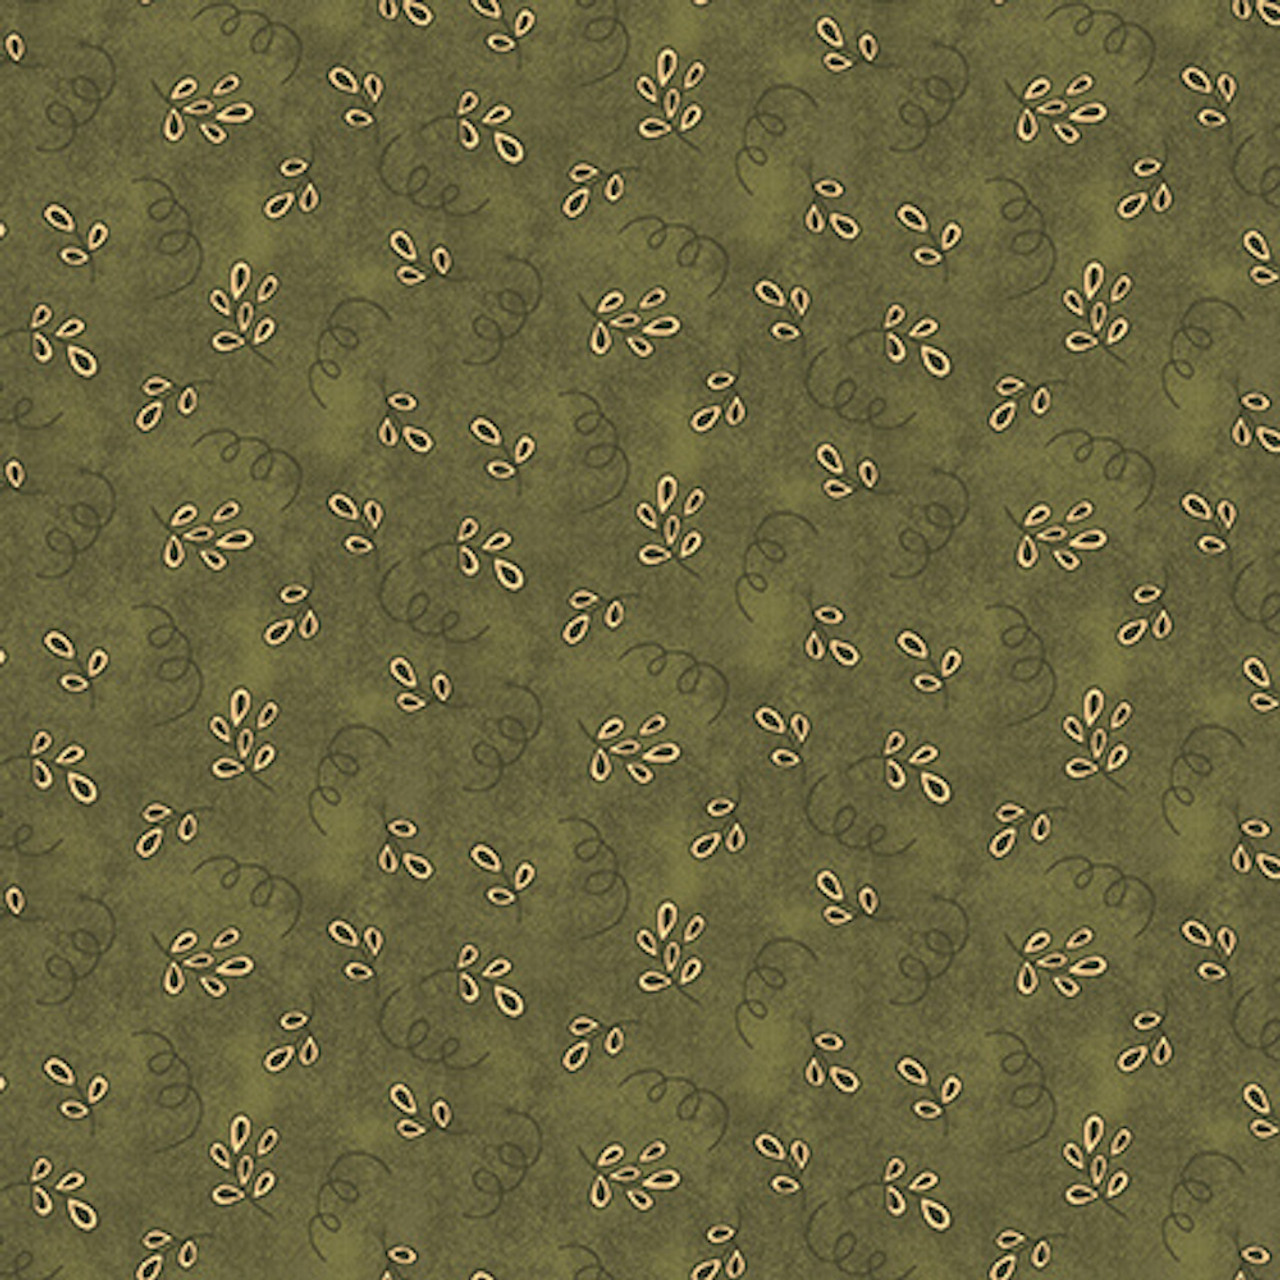 Blank Quilting Ashton Collection Teardrop Floral Green Cotton Fabric By The Yard